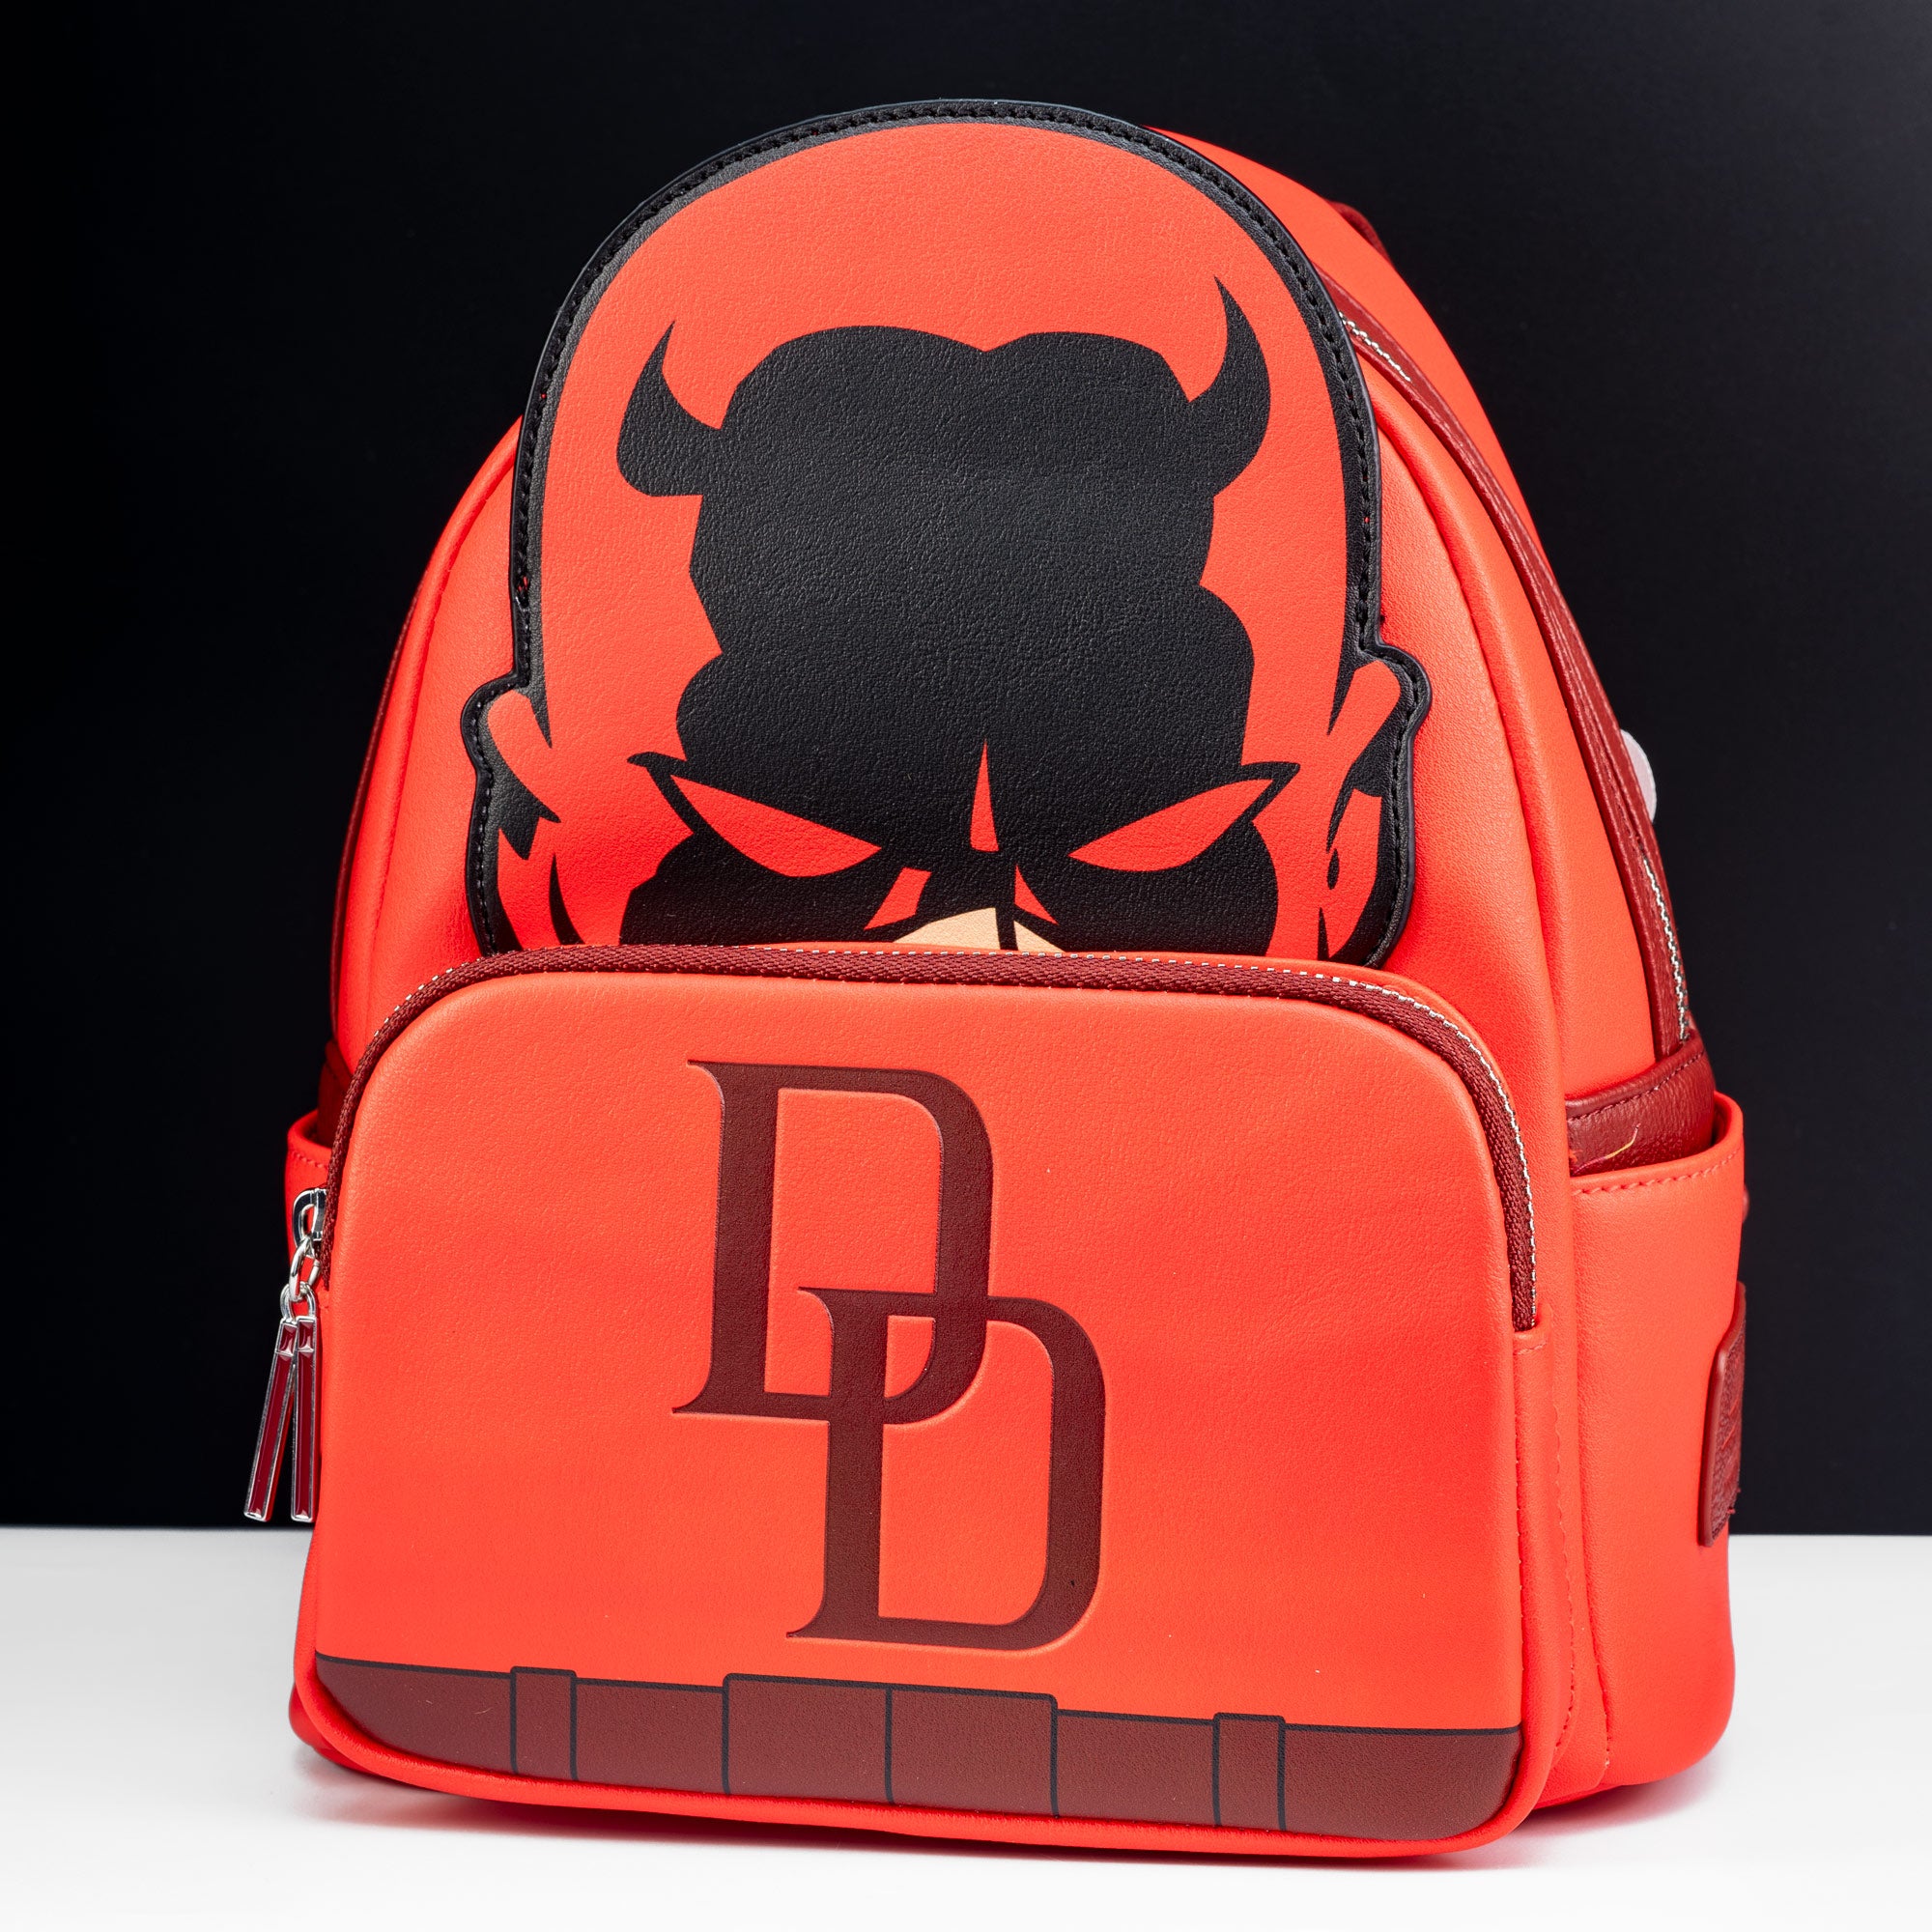 Loungefly x Marvel Daredevil Cosplay Mini Backpack